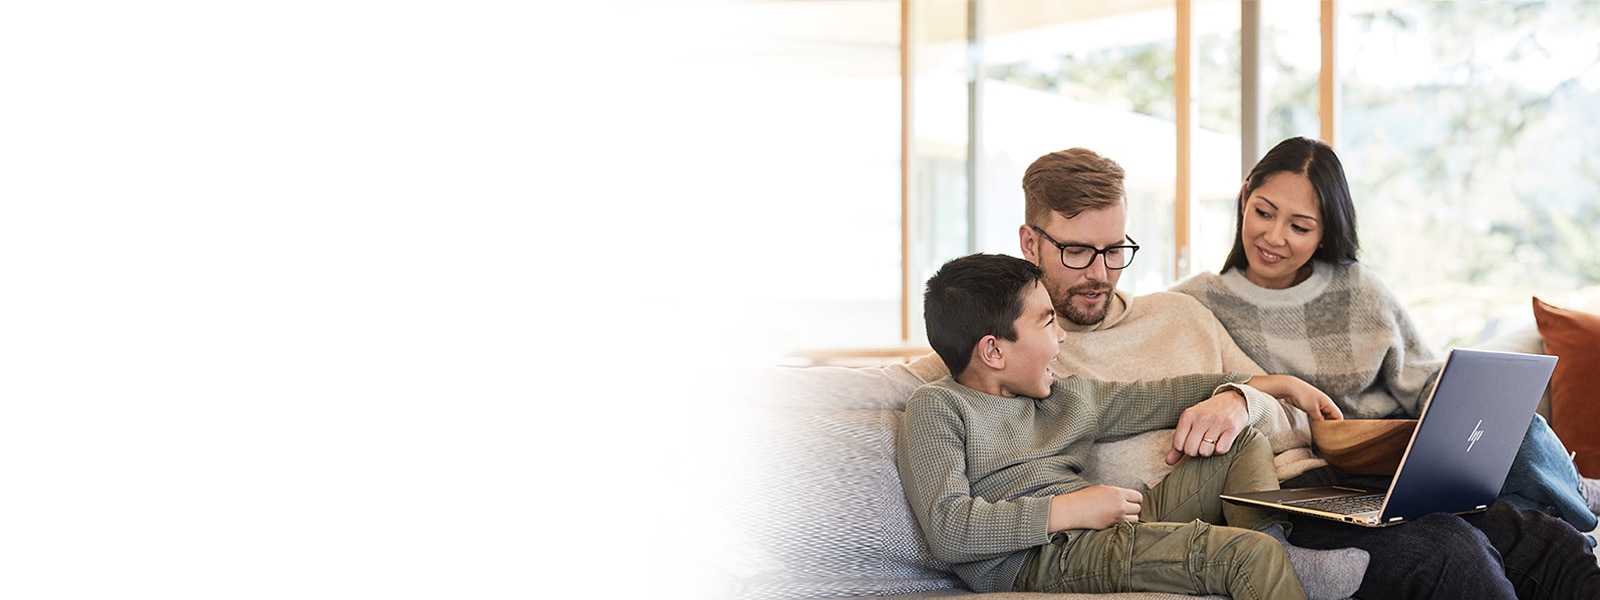 Mom and dad on couch with kid using Windows 10 laptop